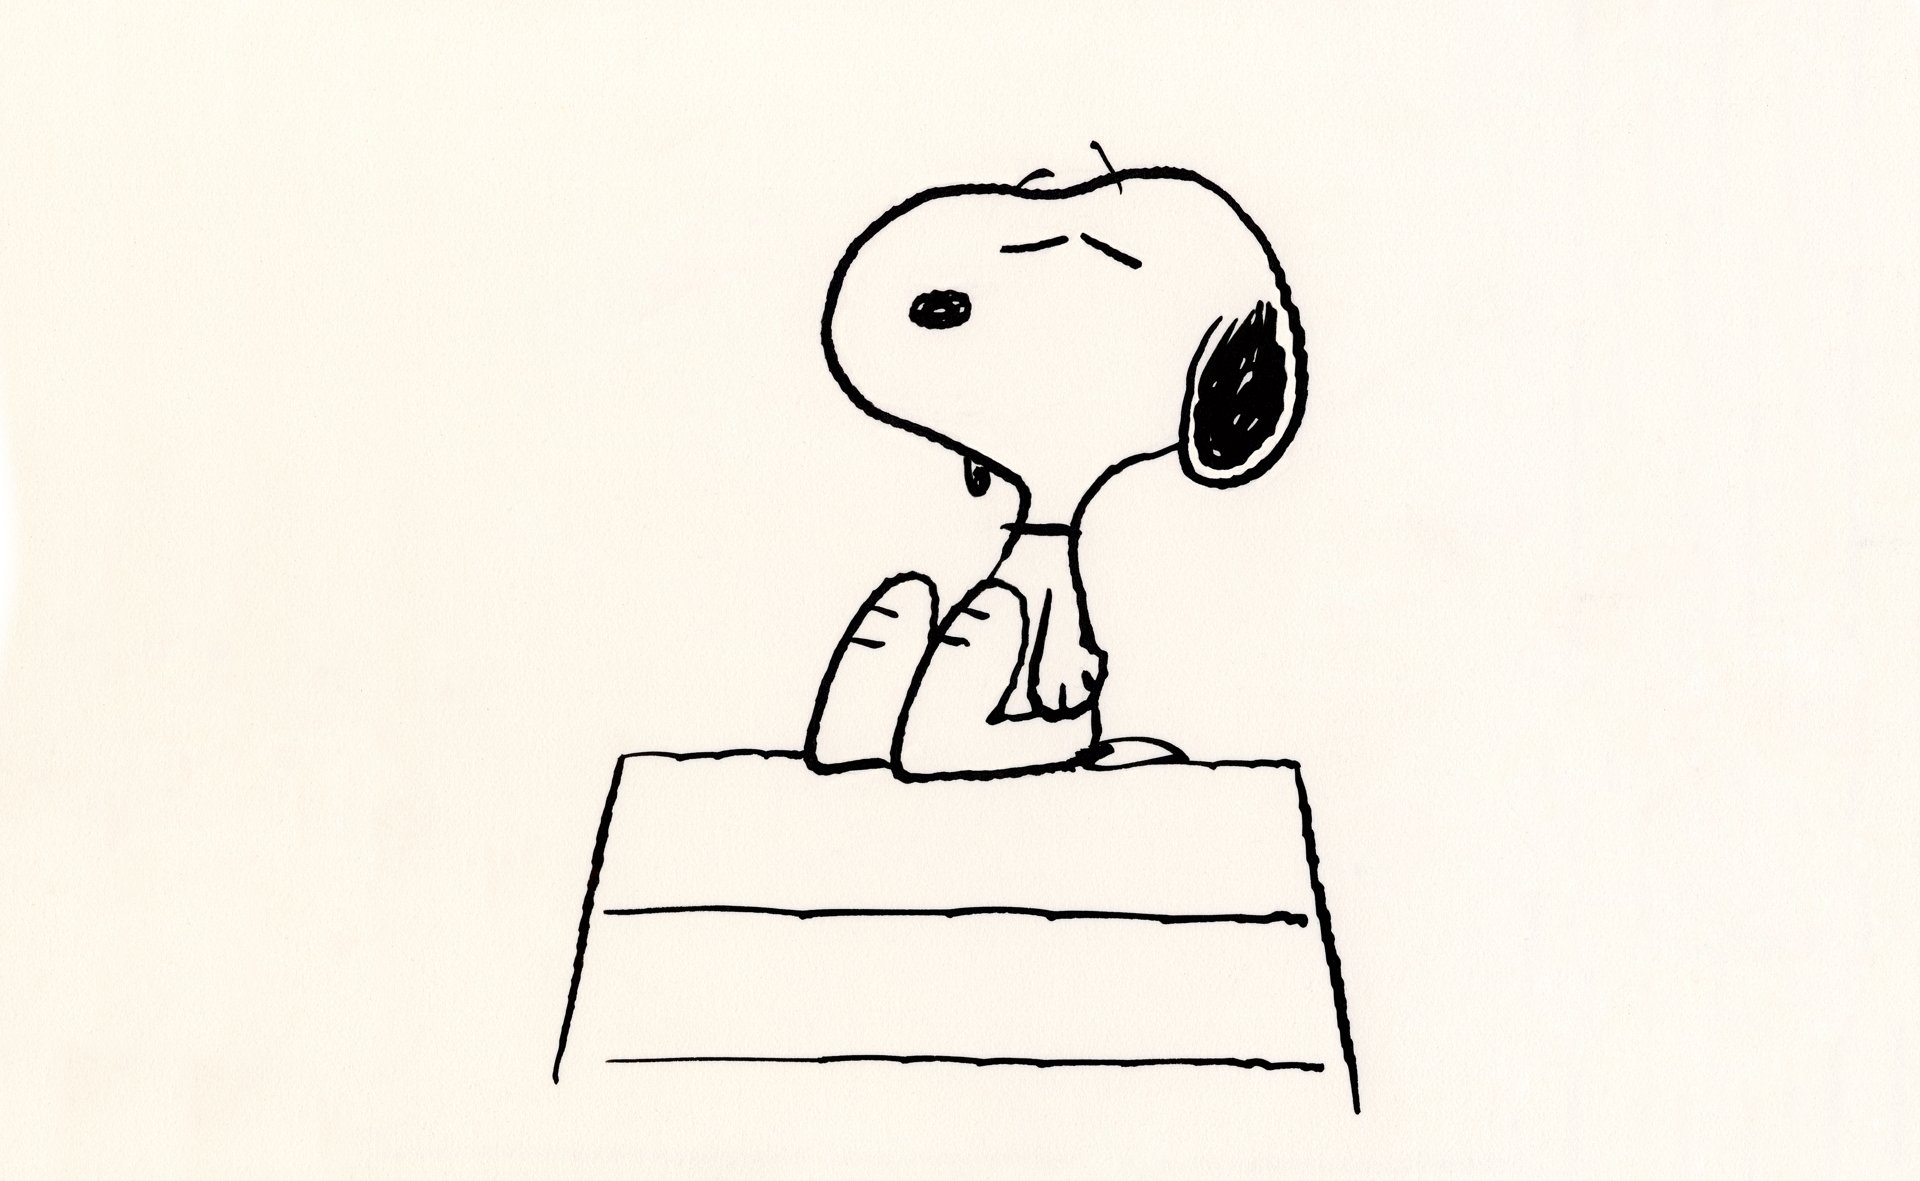 Why Snoopy Is Such a Controversial Figure to ‘Peanuts